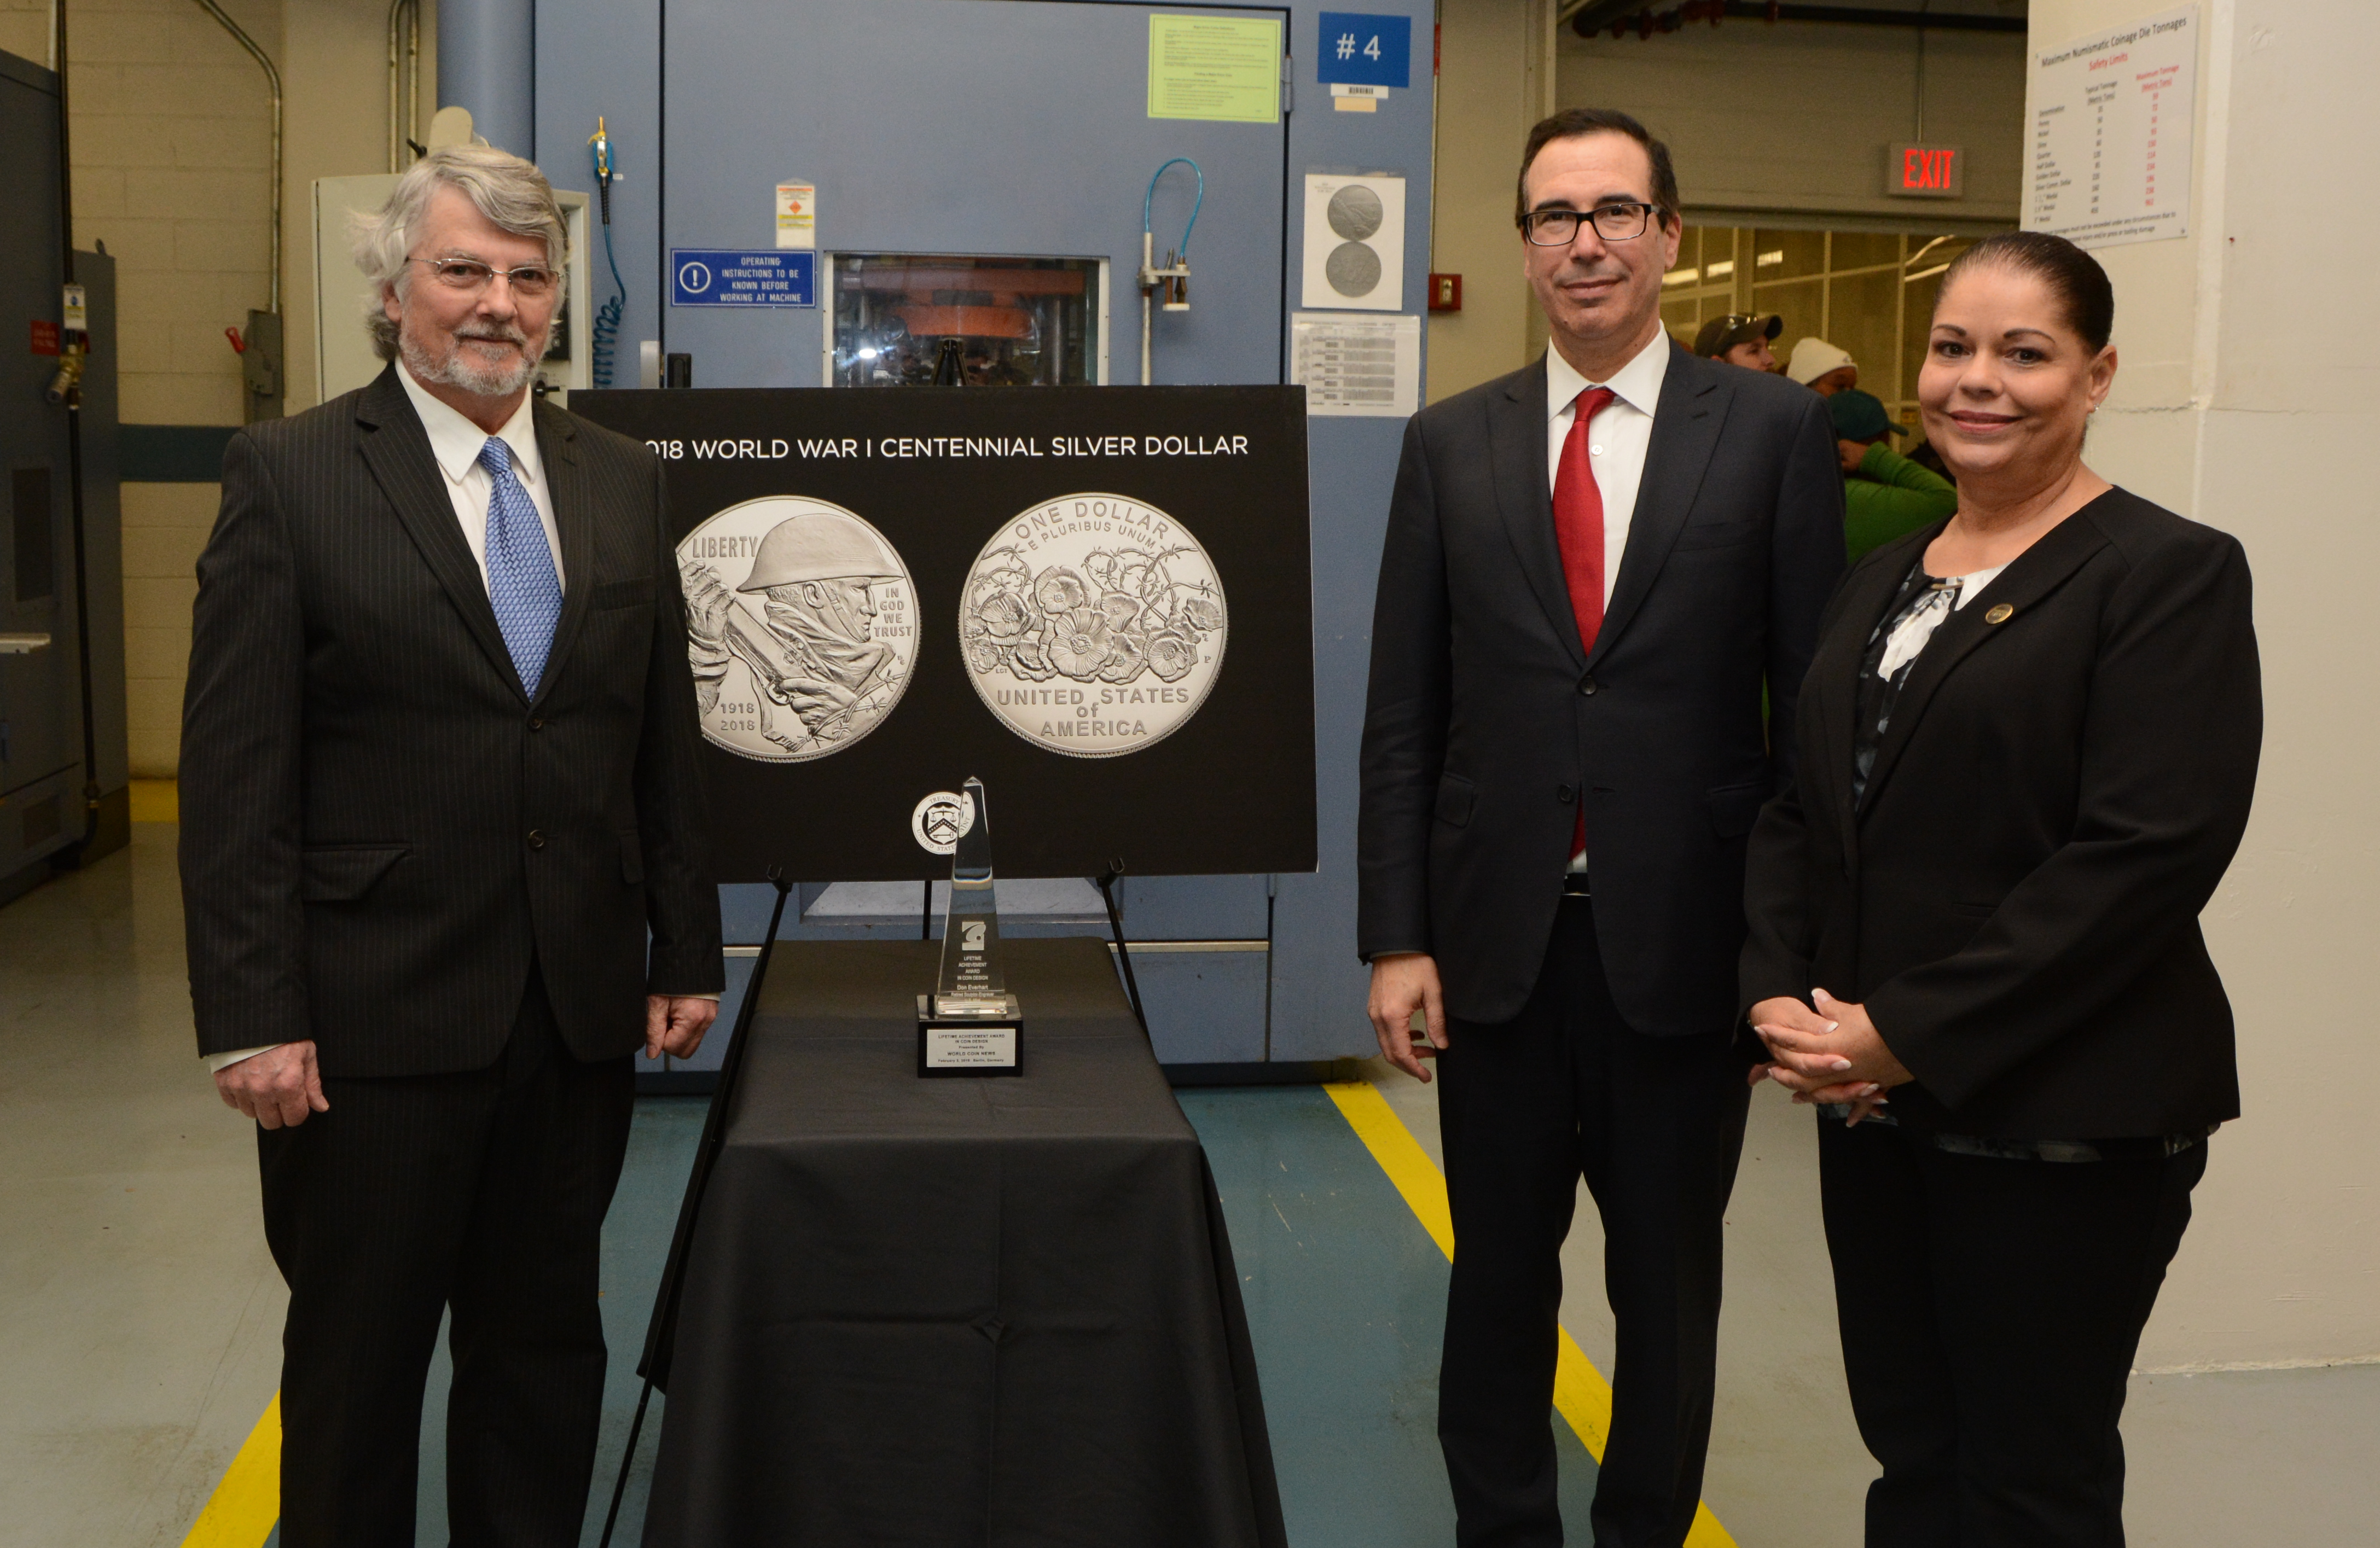 Treasury Secretary Steven Mnuchin, U.S. Mint Acting Superintendent (Philadelphia facility) Laurie Johnson, and retired U.S. Mint Sculptor-Engraver Don Everhart pose for a photo during a tour of the numismatic room at the U.S. Mint facility in Philadelphia